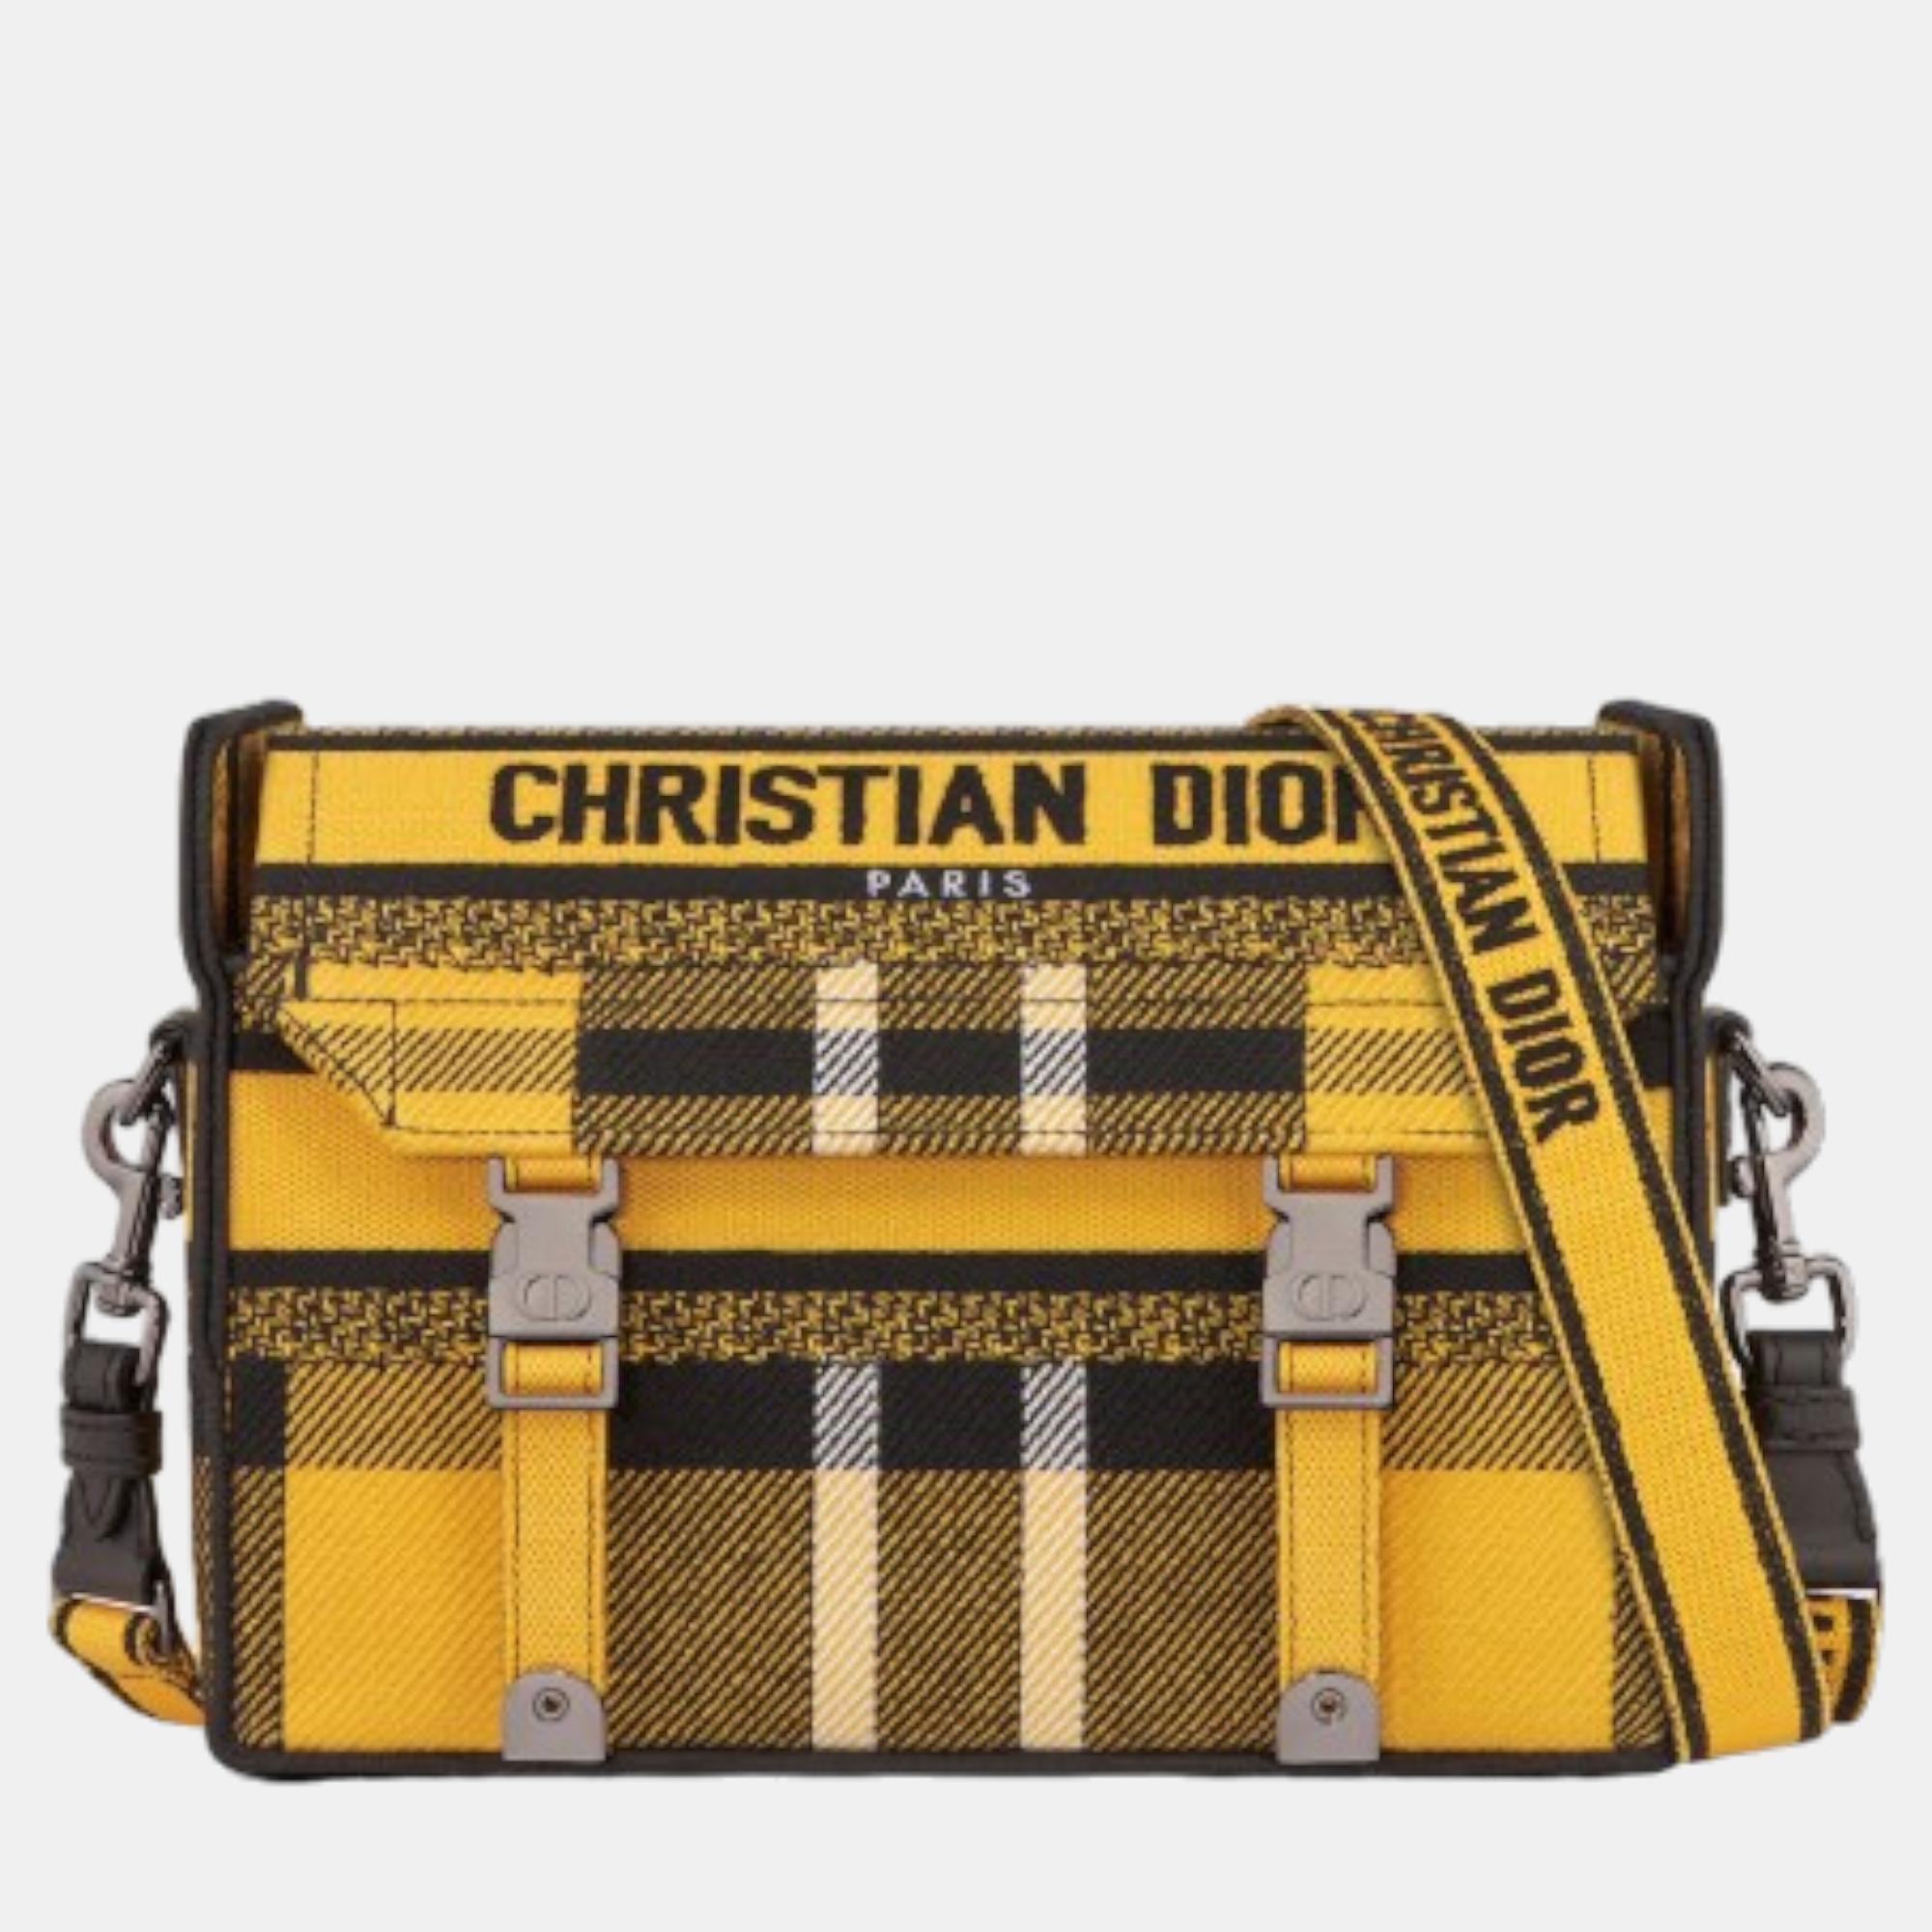 DIORCAMP SMALL Yellow and Black Check'n'Dior Embroidery BAG M1241BRUY33CU